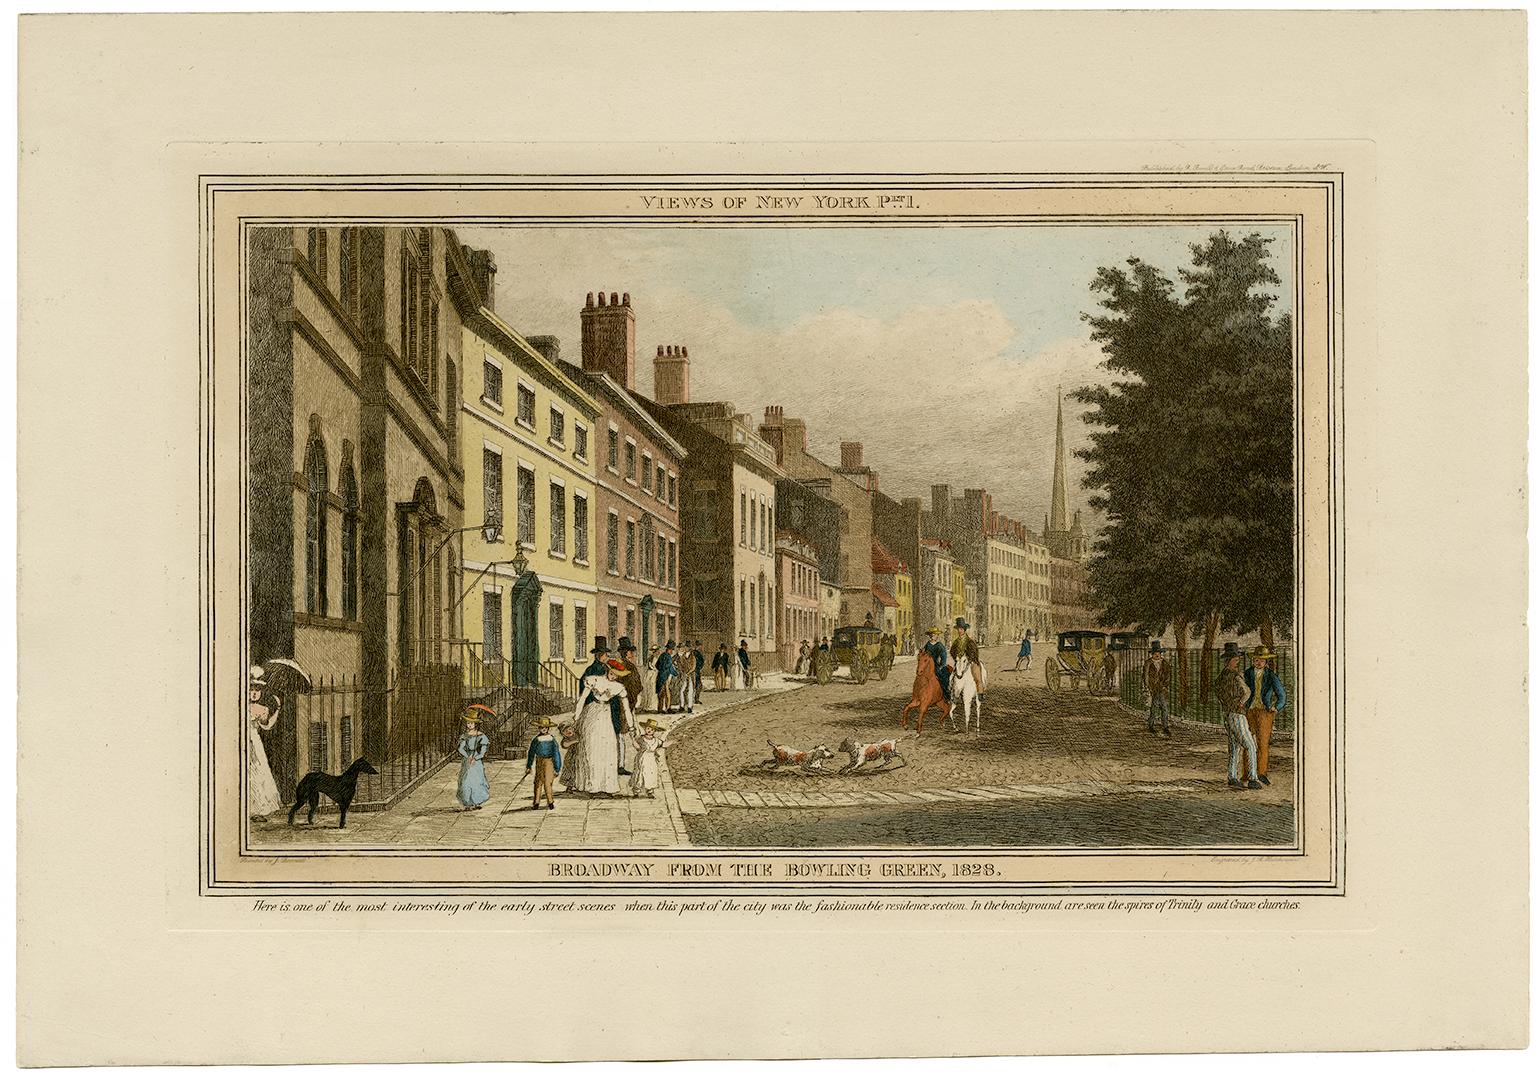 Broadway from the Bowling Green, 1828   — early New York City, hand-coloring - Print by J. R. Hutchinson